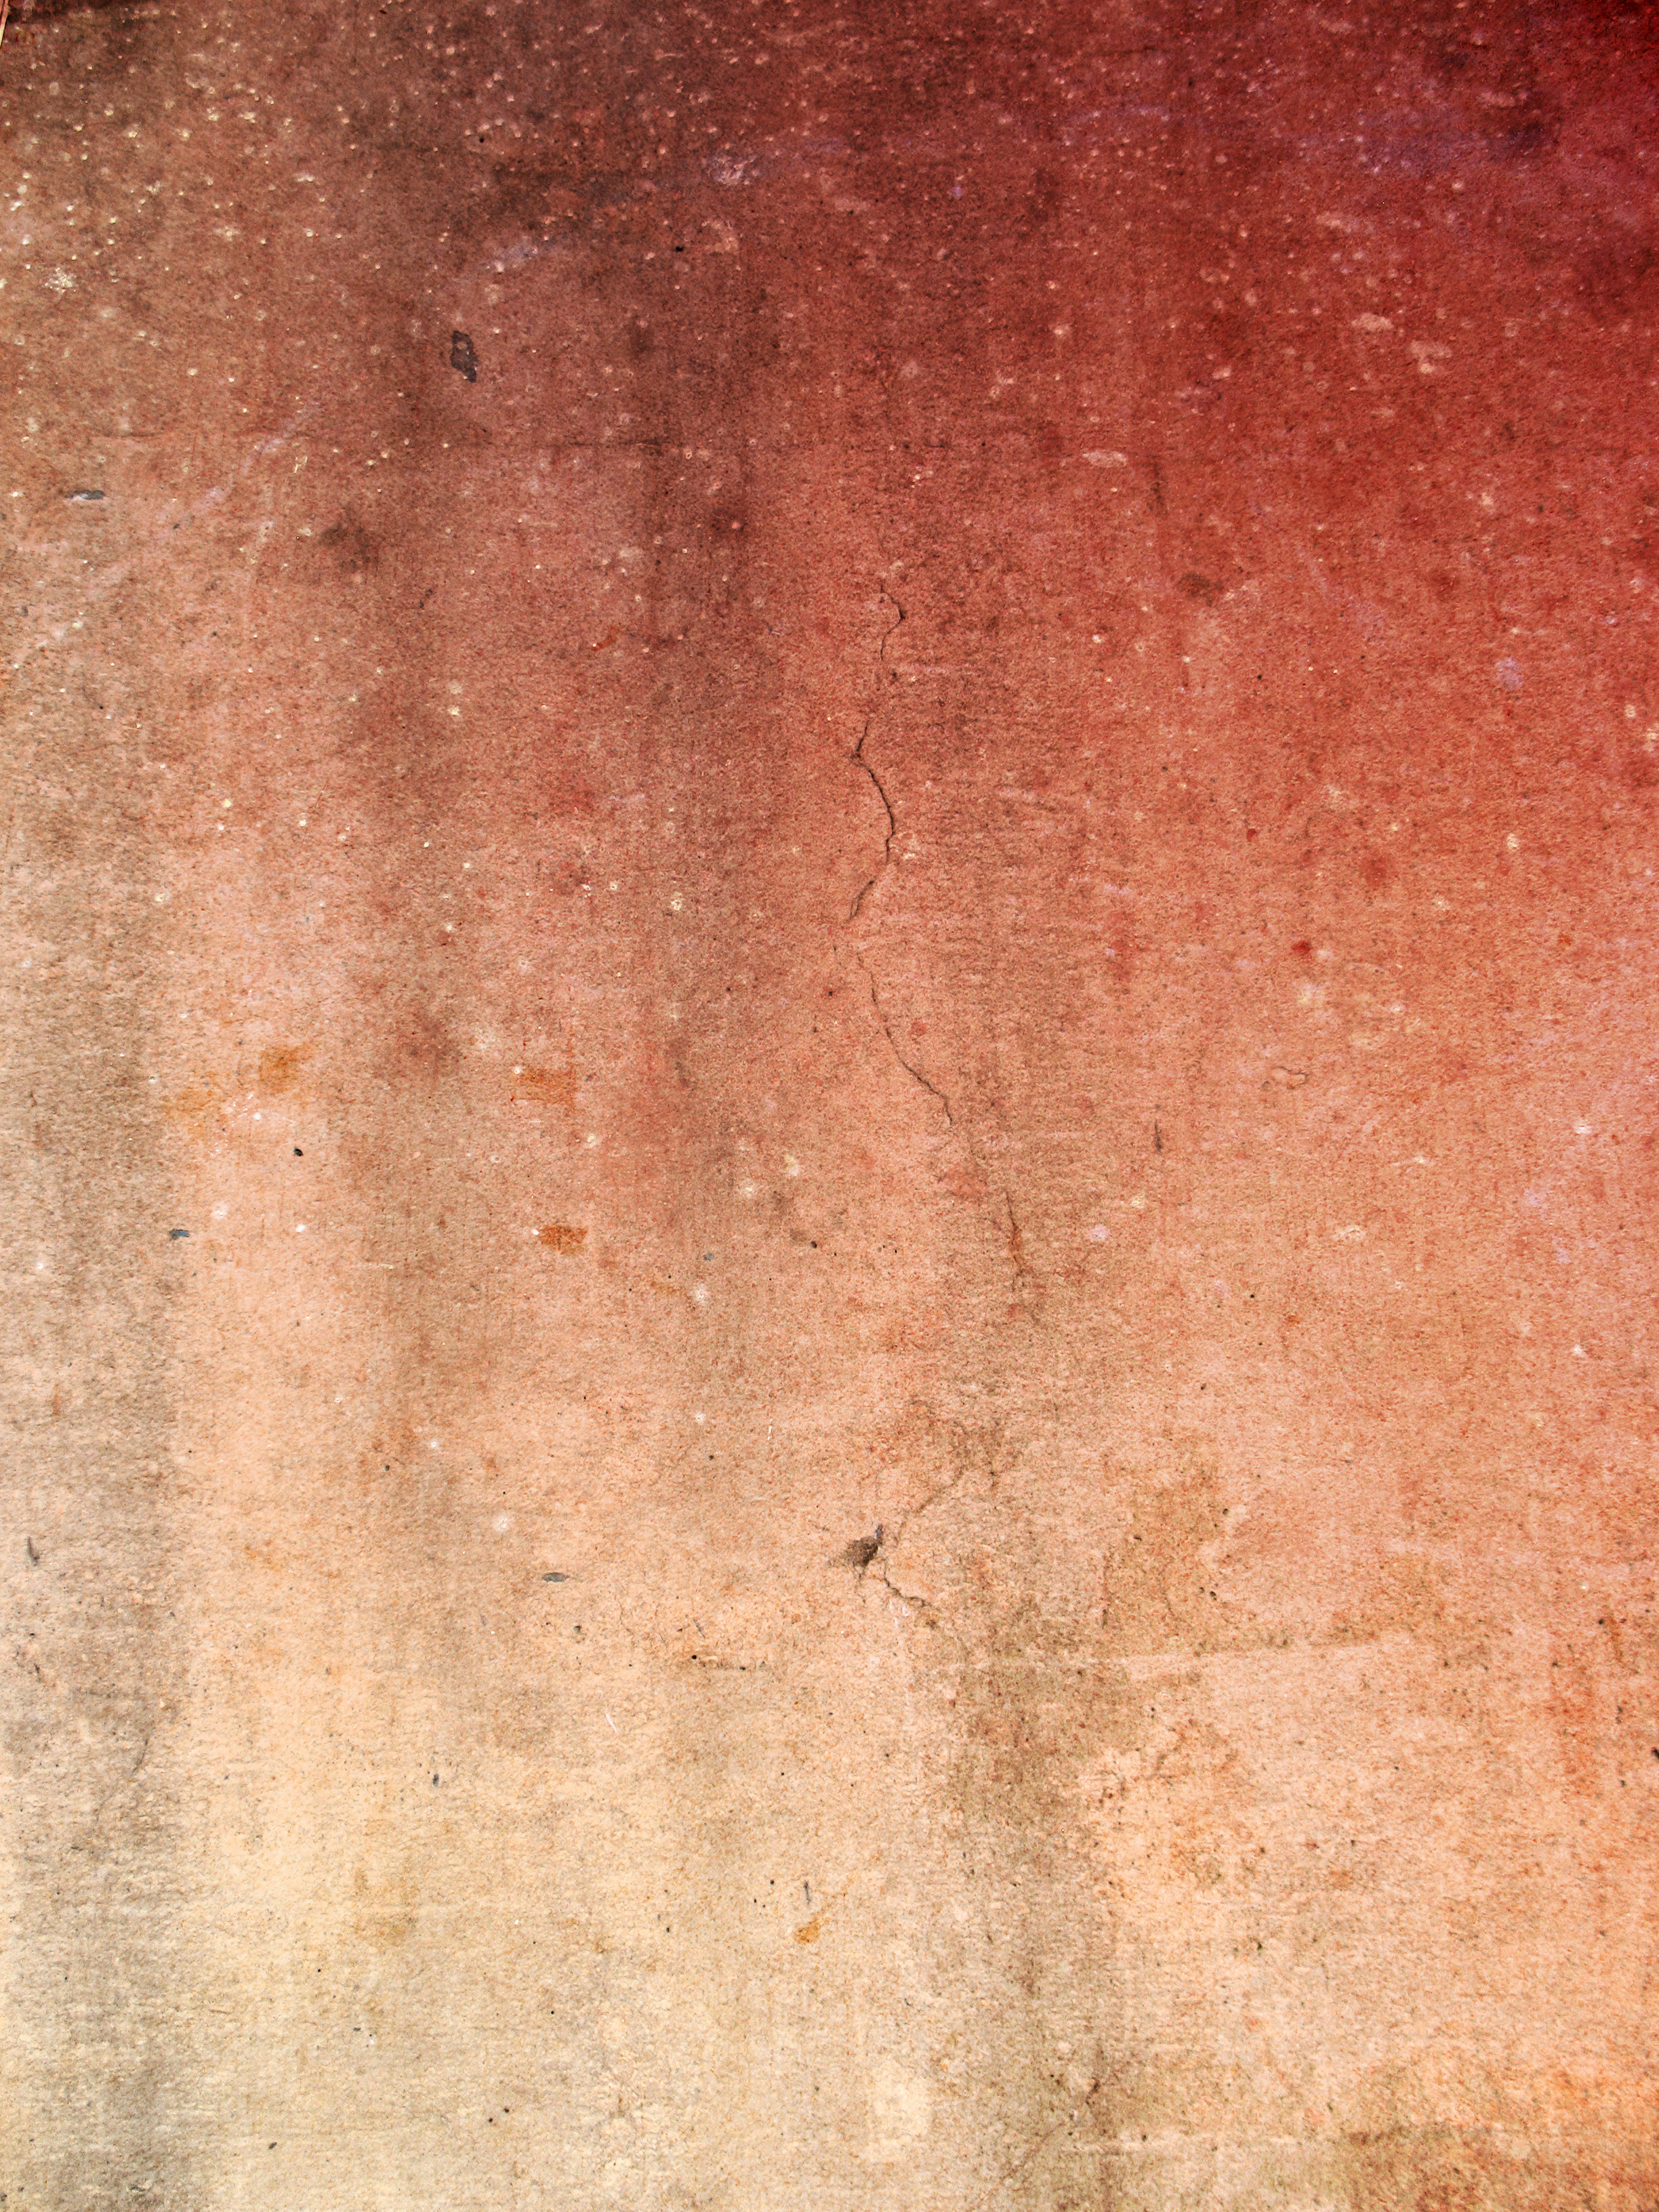 Free Colorful Grunge Texture Texture - L+T